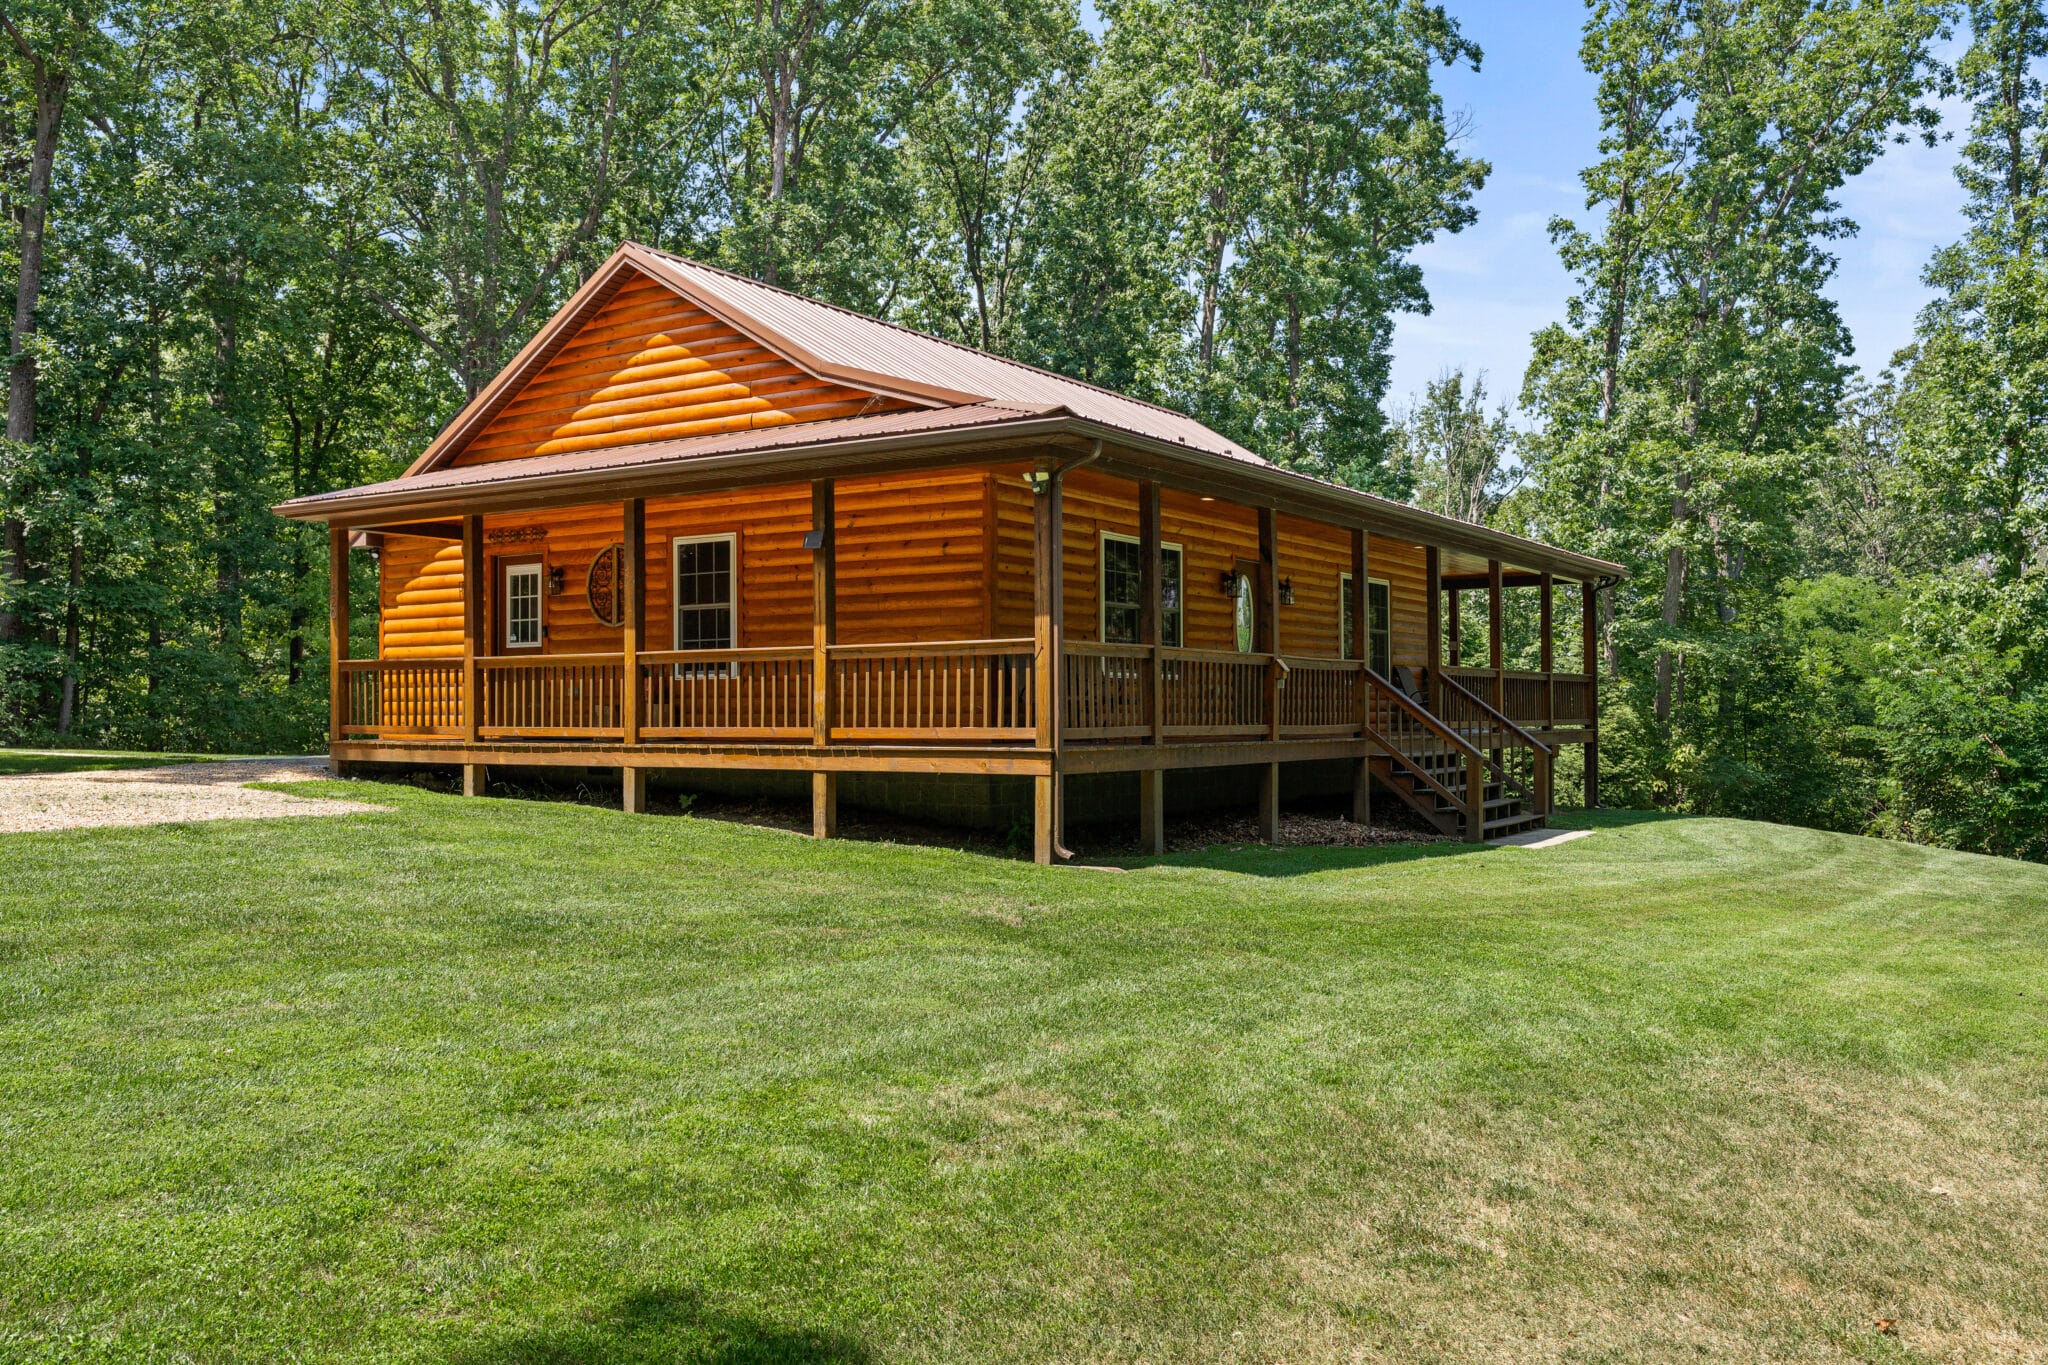 The Barred Owl Lodge in the Shenandoah Valley, in the shadow of Shenandoah National Park!